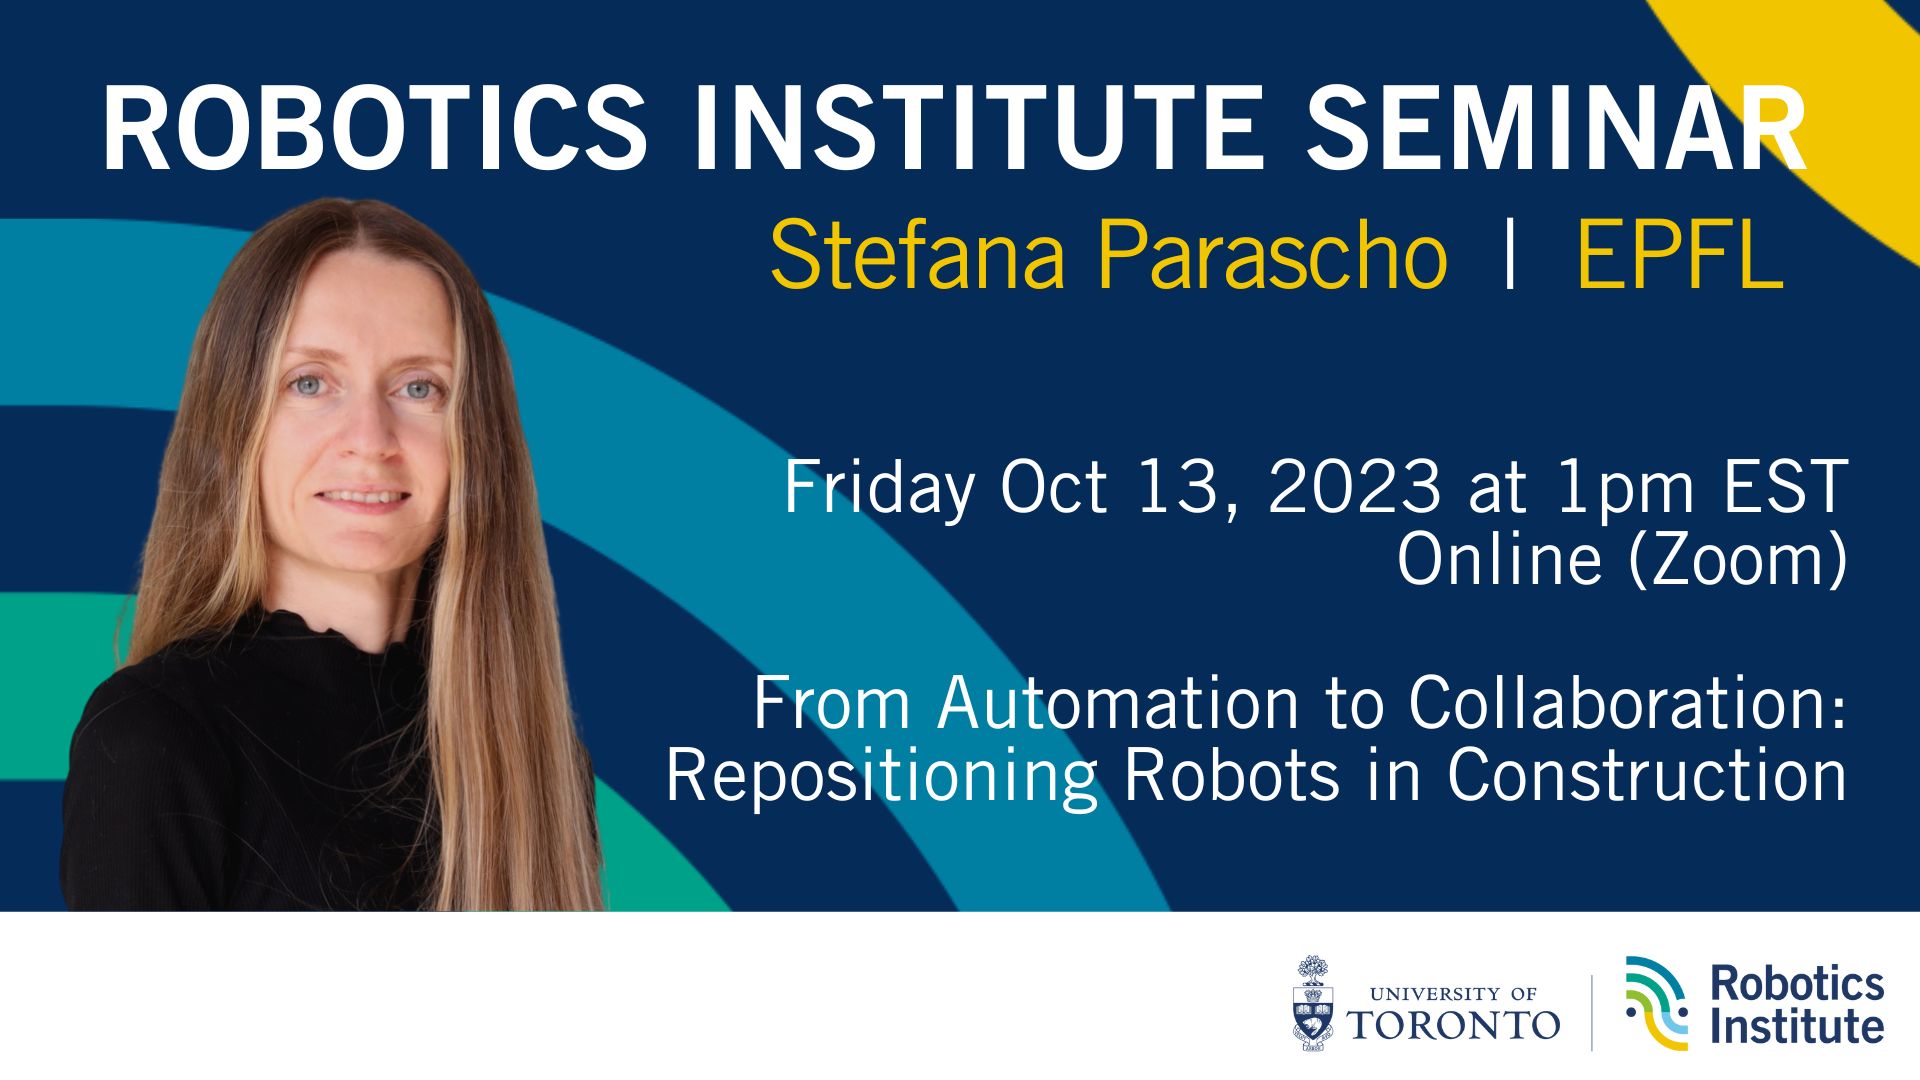 Prof. Parascho lecture event at University of Toronto